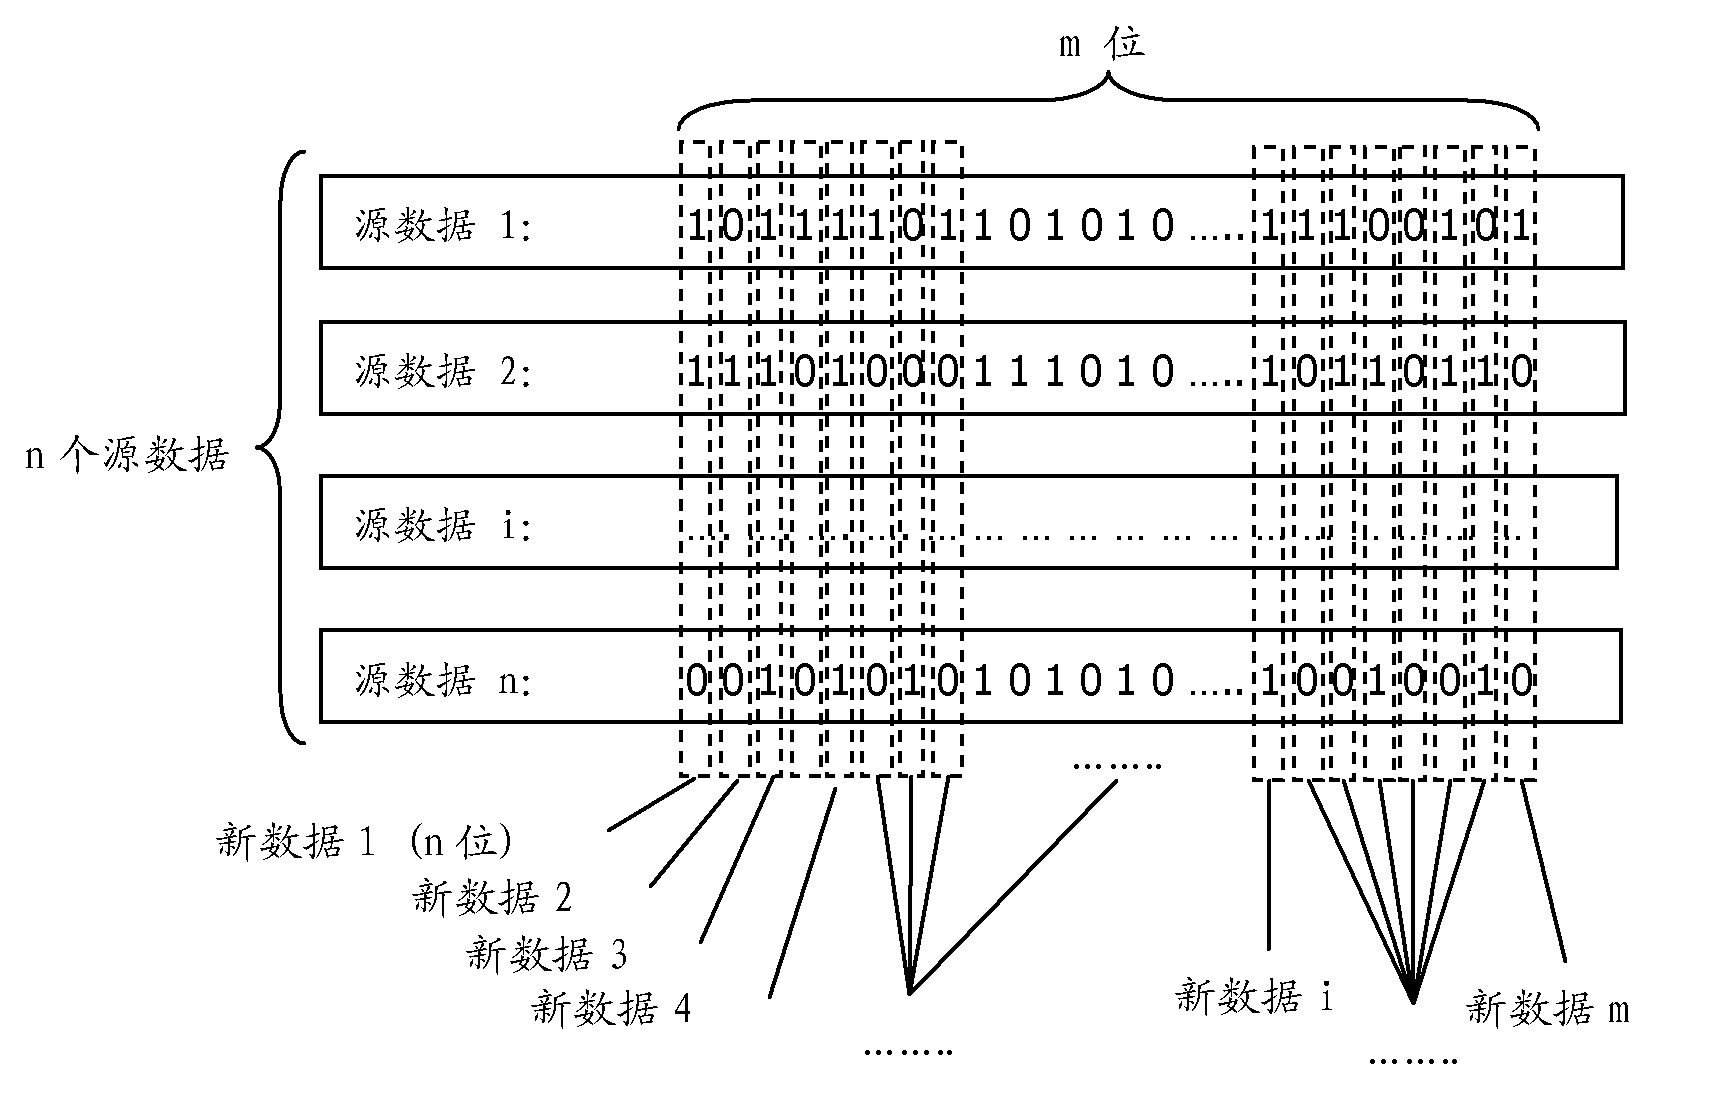 Cloud storage data storage and retrieval method, device and system